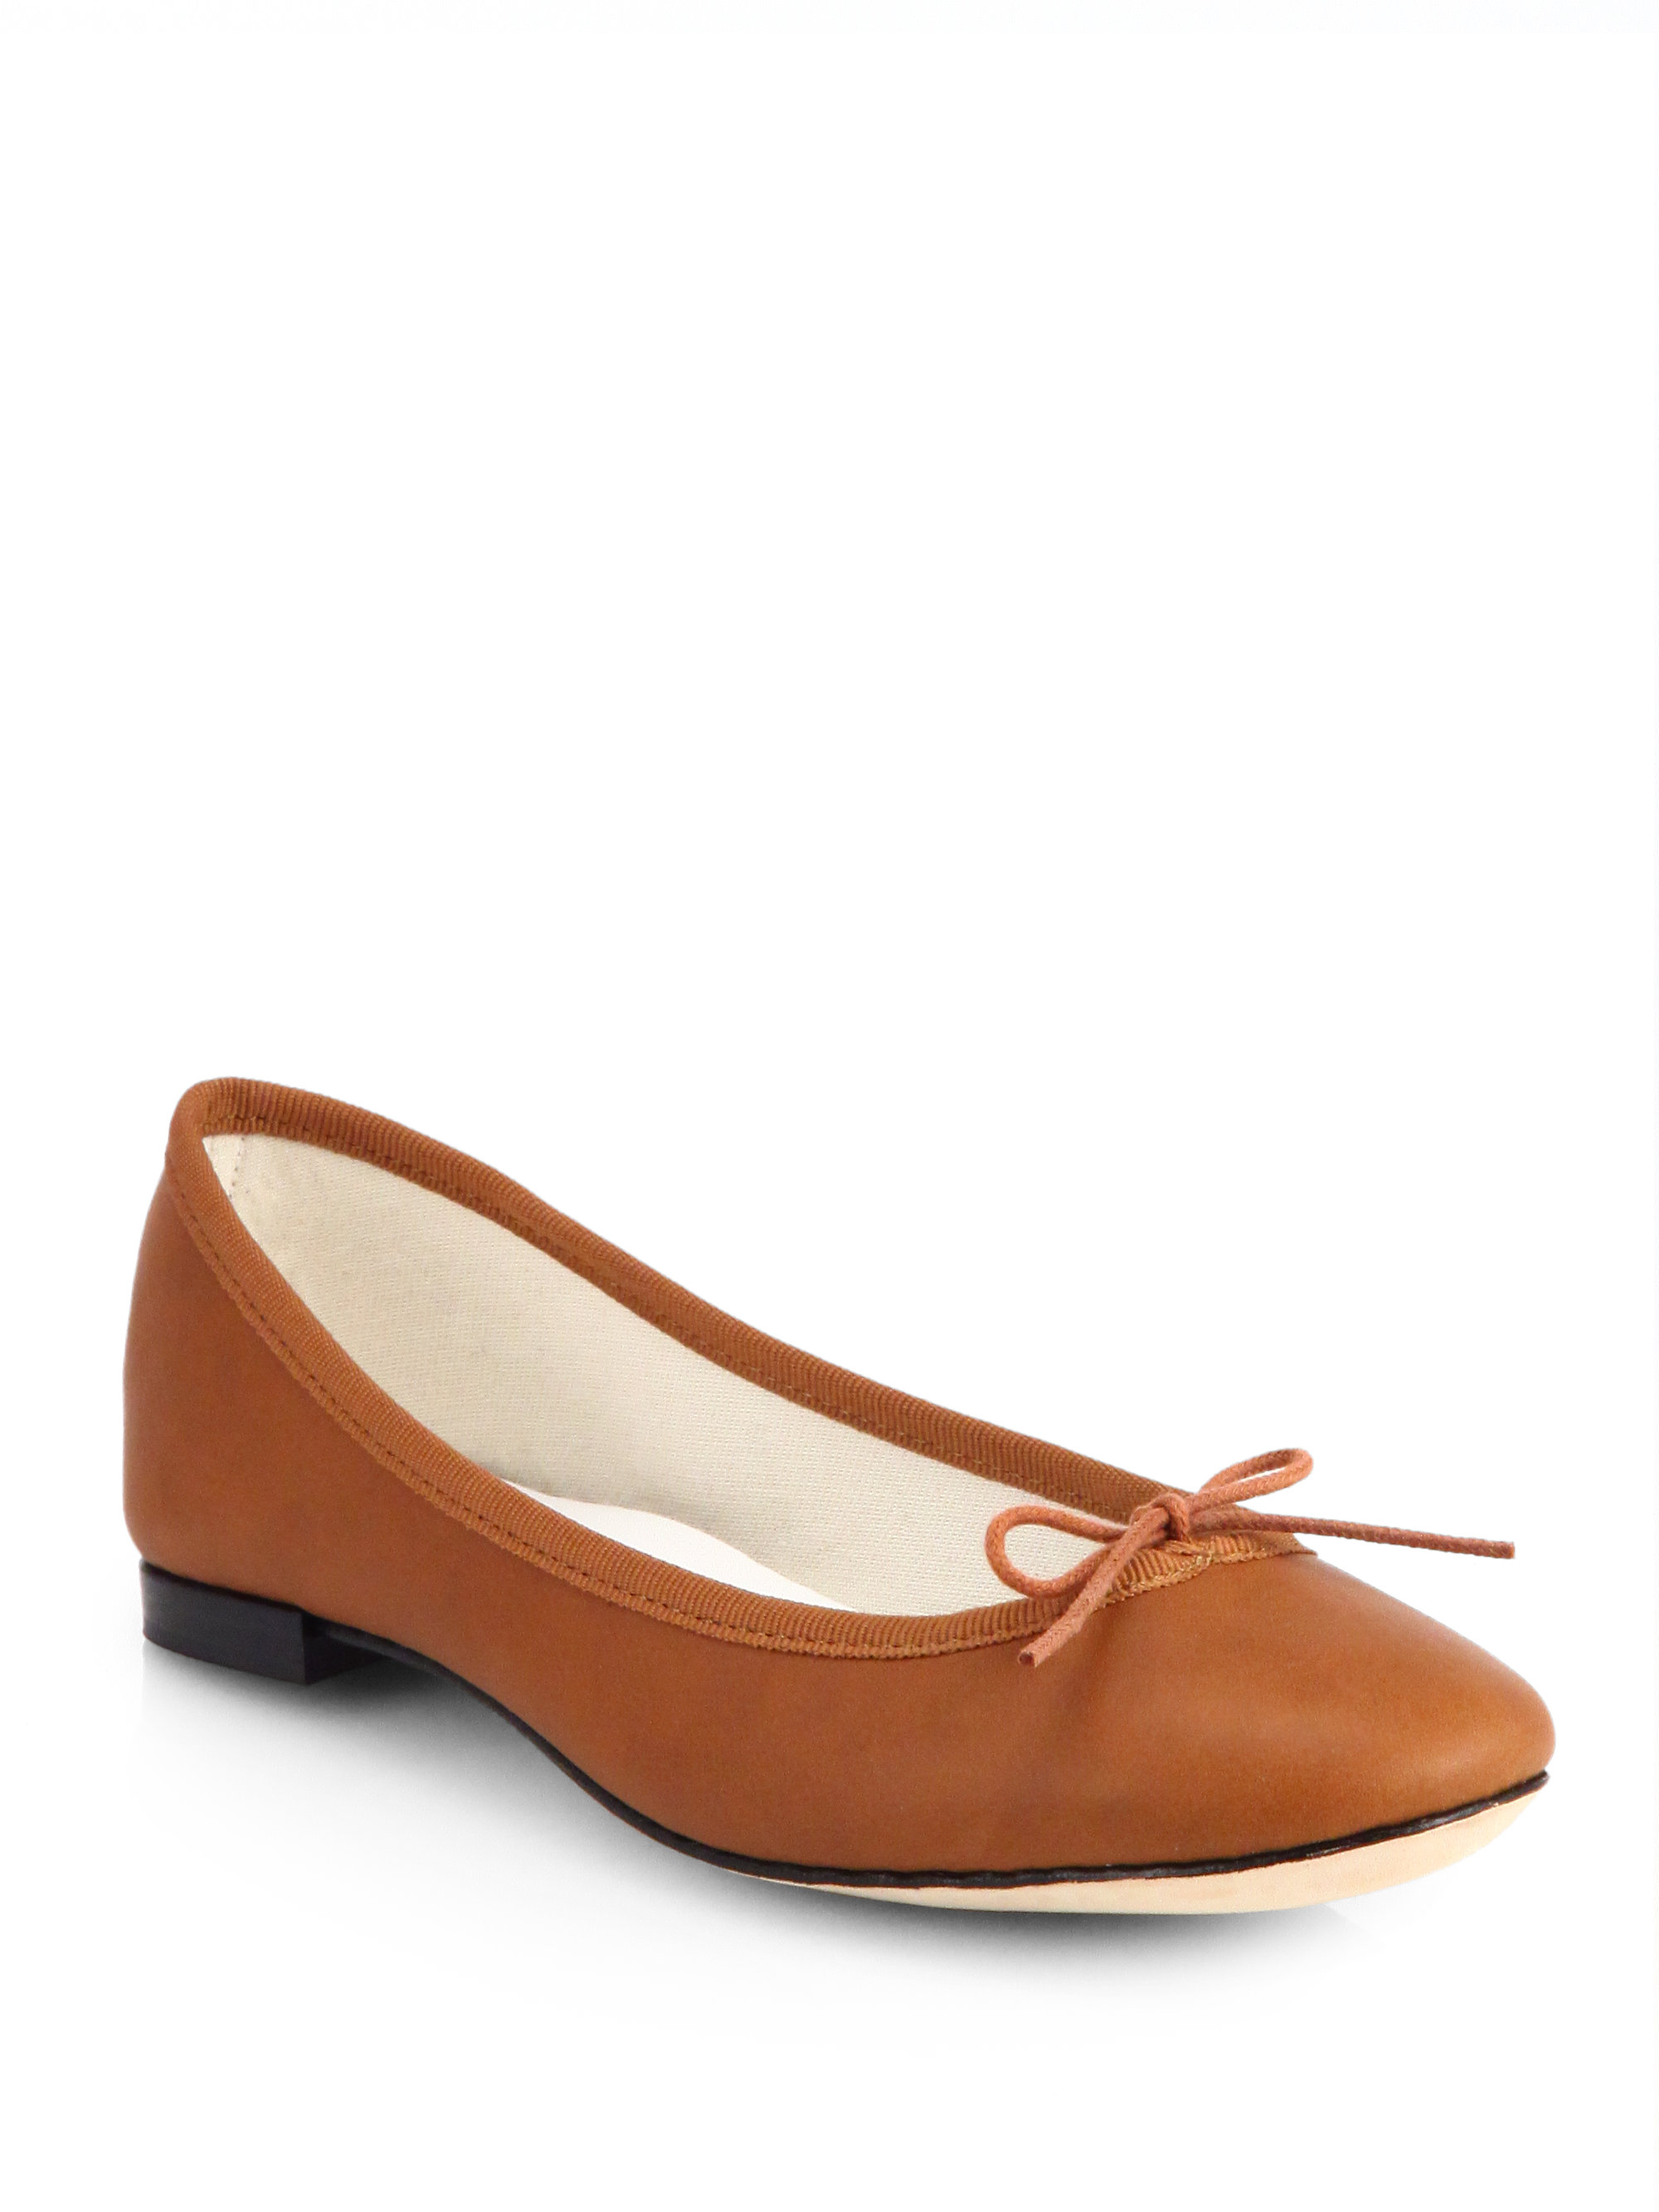 Repetto Cendrillon Leather Ballet Flats In Brown Camel Lyst